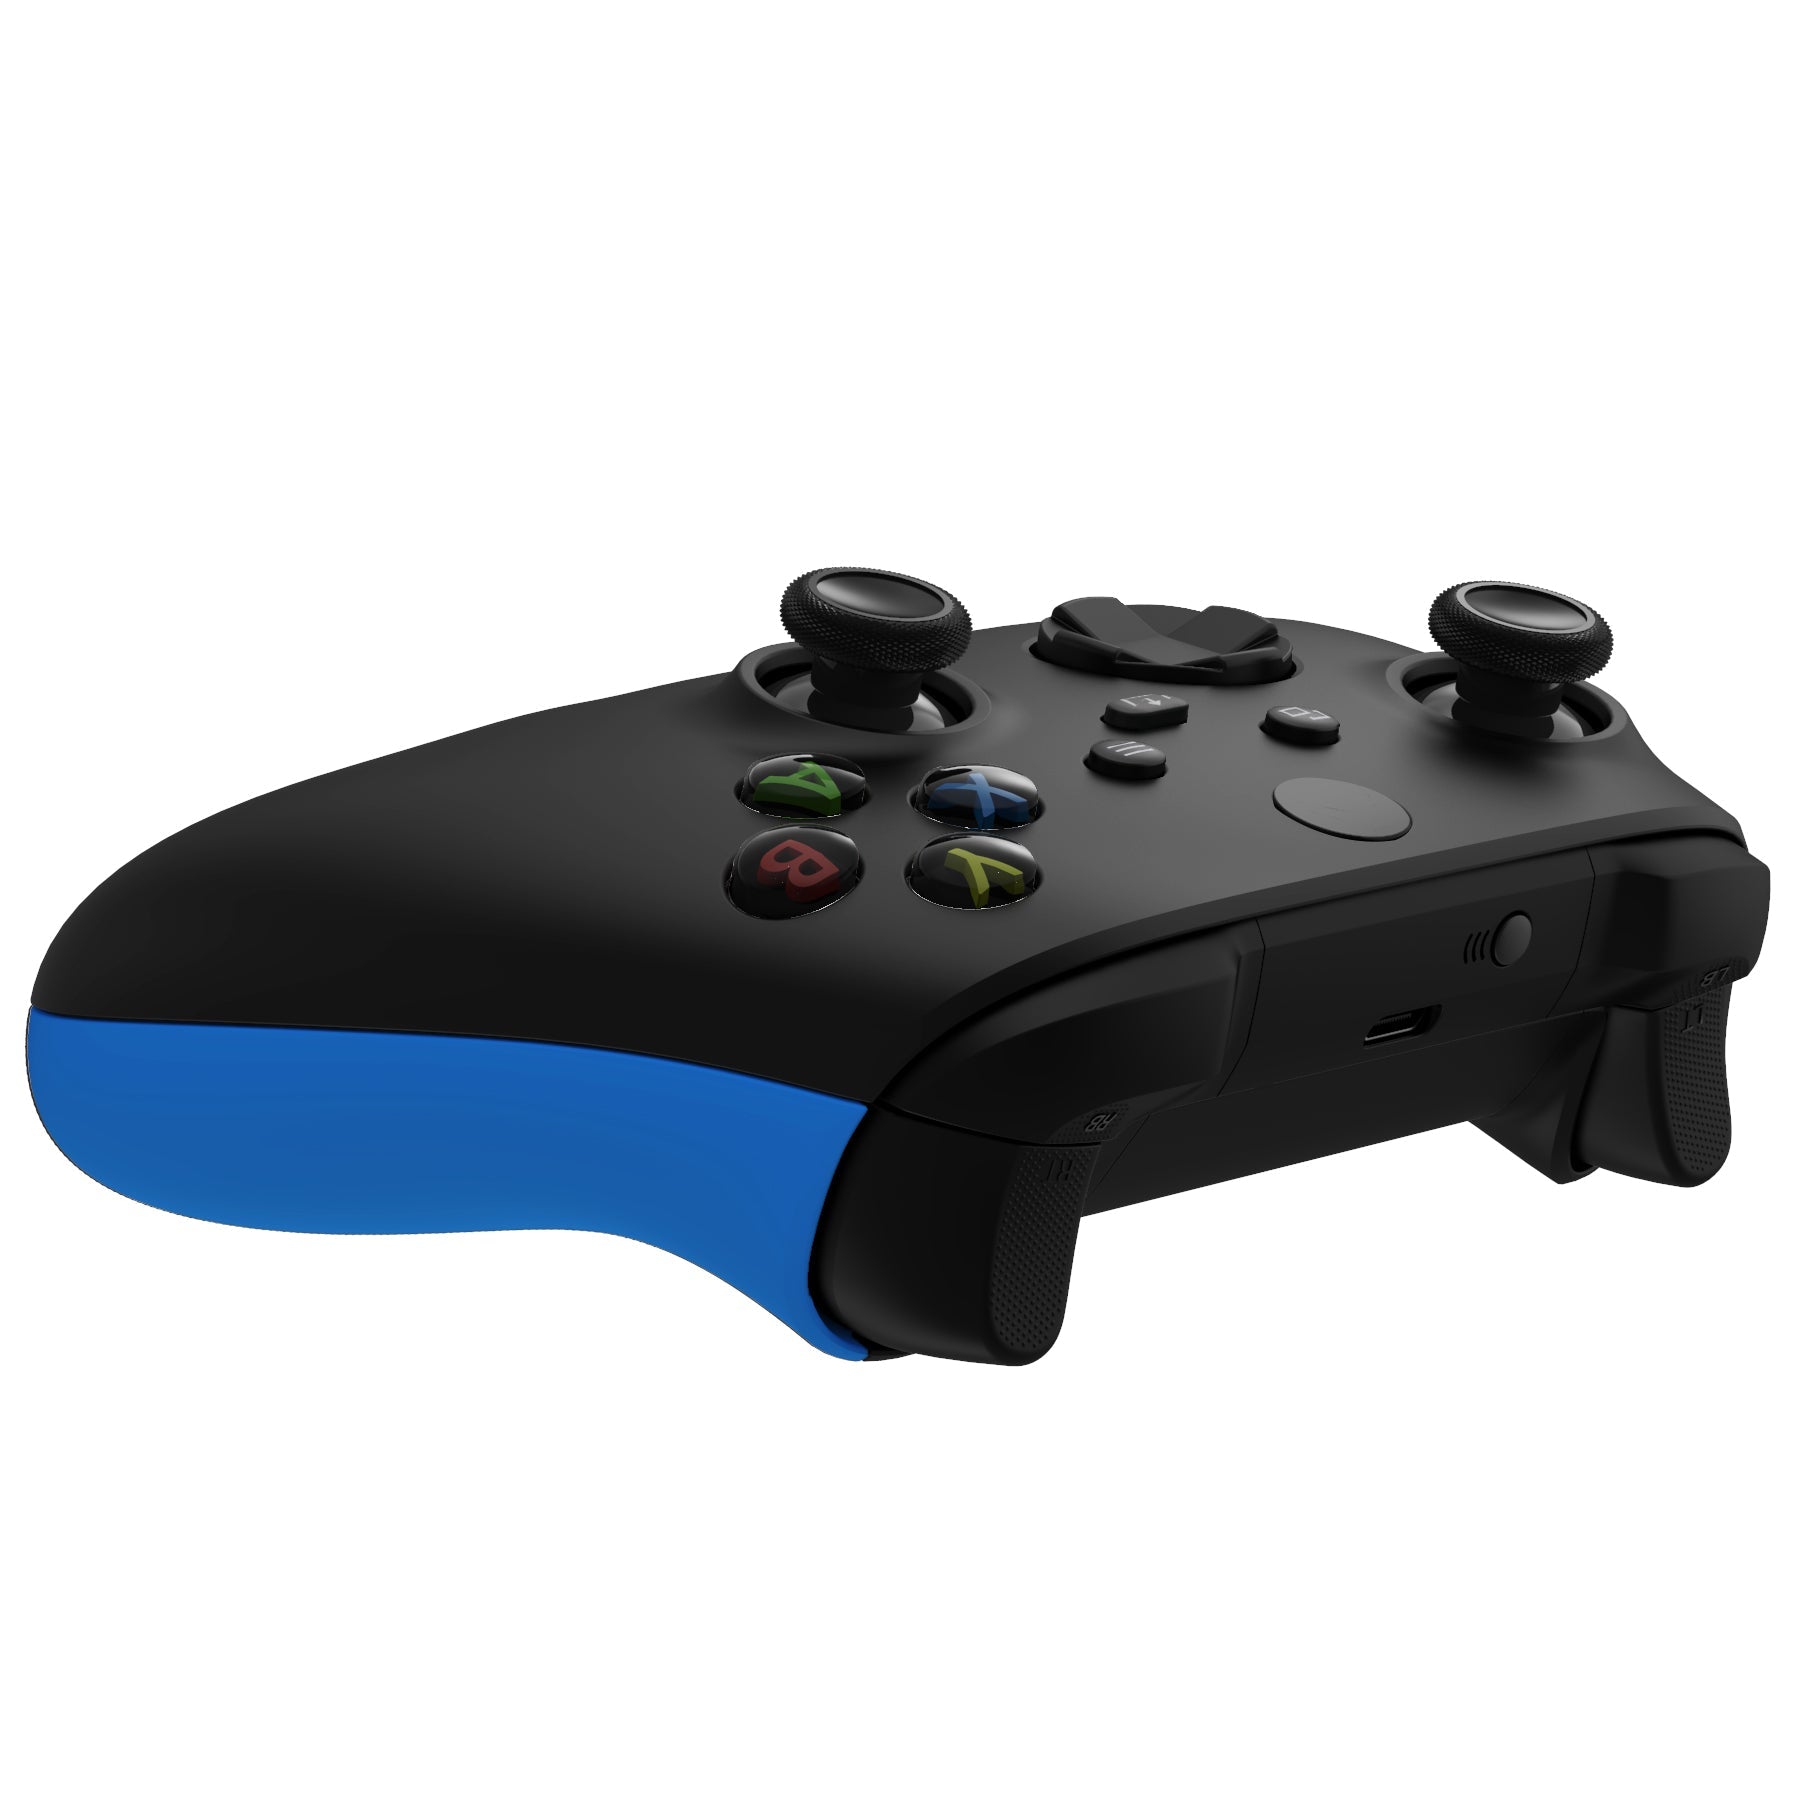 eXtremeRate Retail Blue Soft Touch Grip Back Panels, Comfortable Non-Slip Side Rails Handles, Game Improvement Replacement Parts for Xbox Series S / X Controller - Controller NOT Included - PX3P305